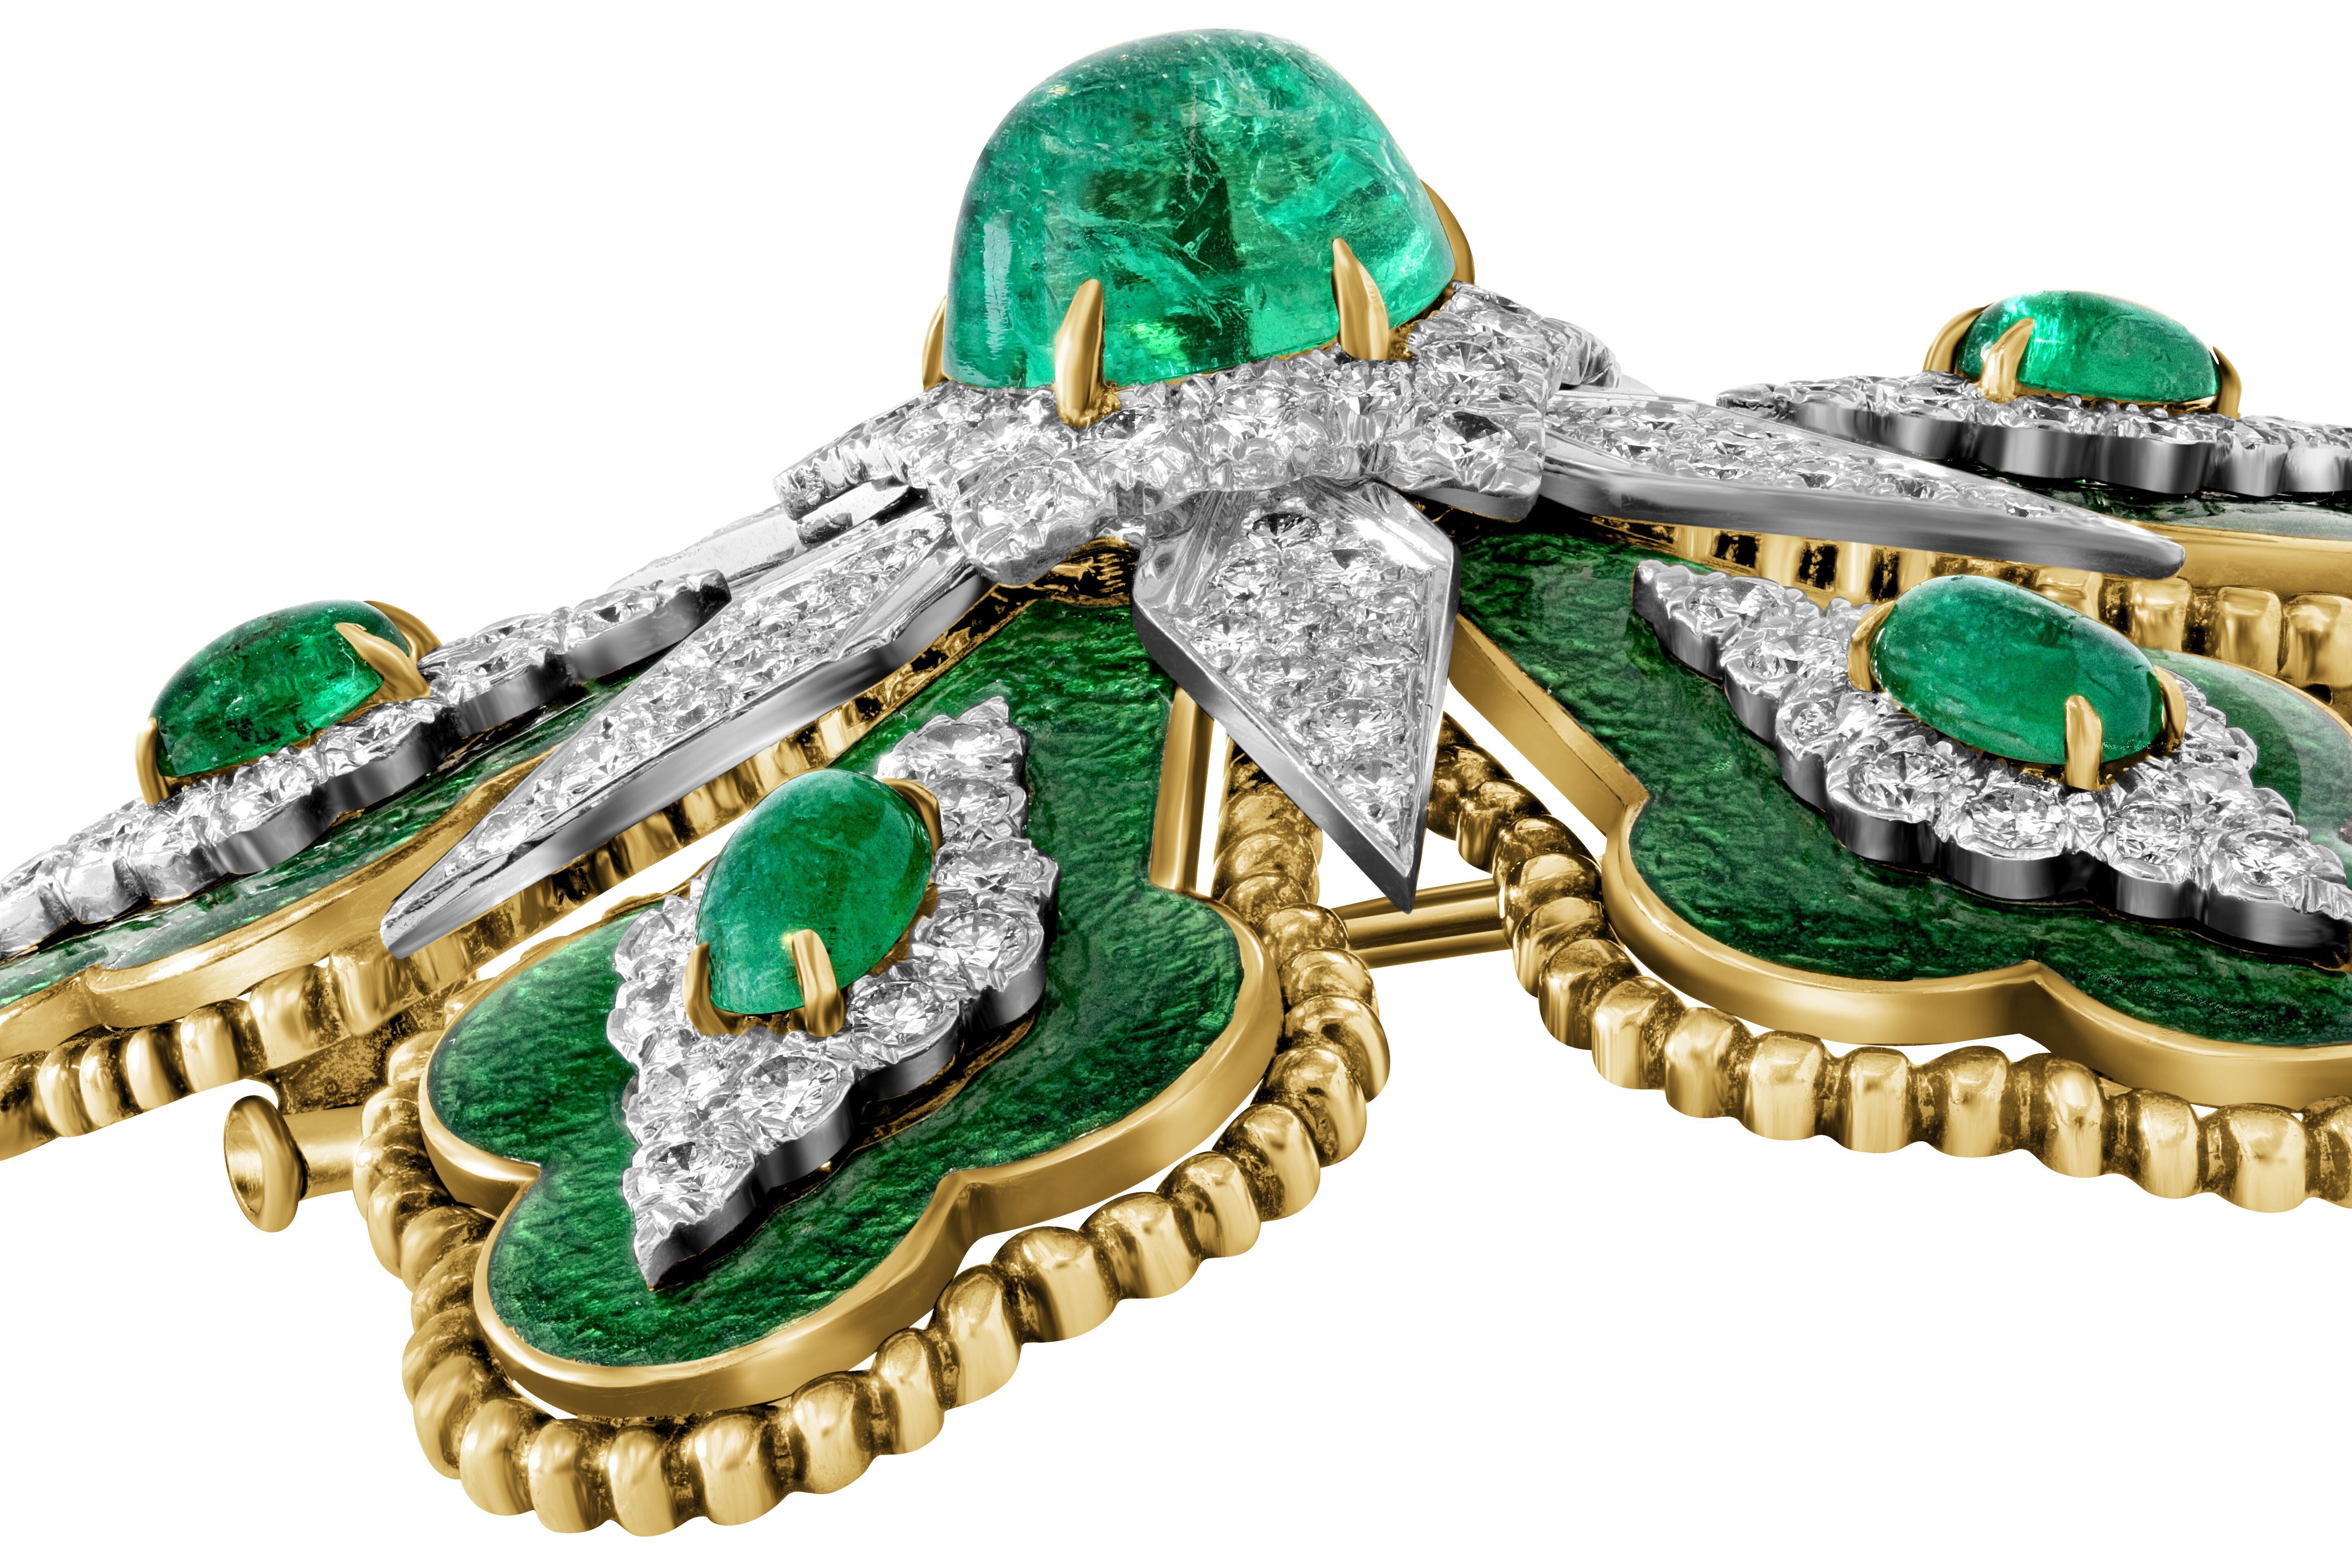 Exceedingly rare estate David Webb signed floral brooch featuring a 5.85ct center emerald cabochon, approximately 3cts of emeralds, approximately 3cttw of pavé set diamonds and marbleized emerald green guilloché enamel set in platinum and 18k yellow